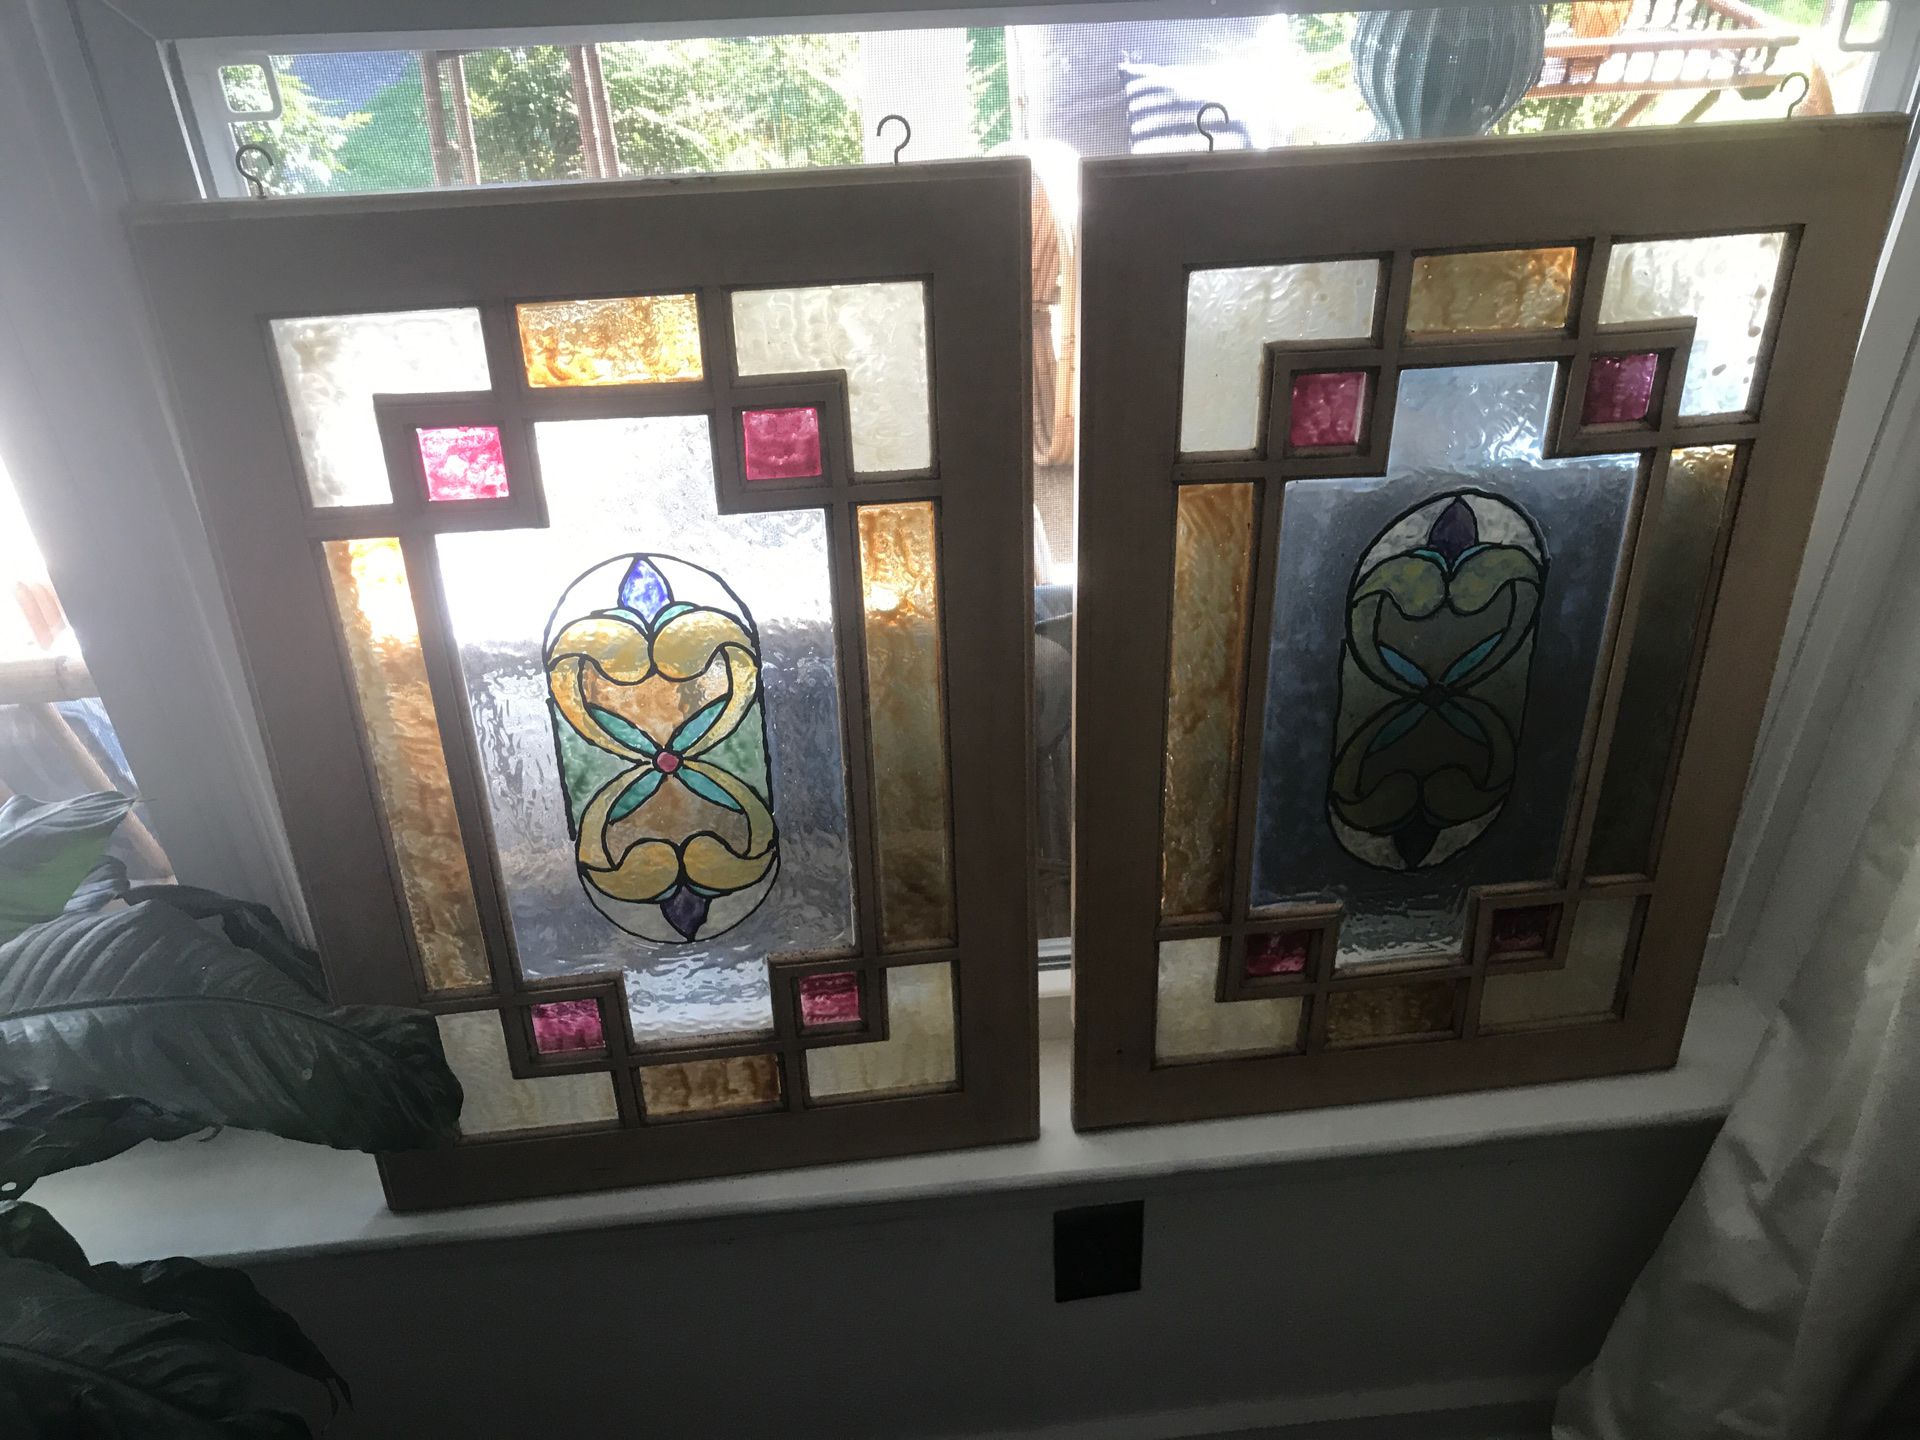 Faux stained glass in antique windows